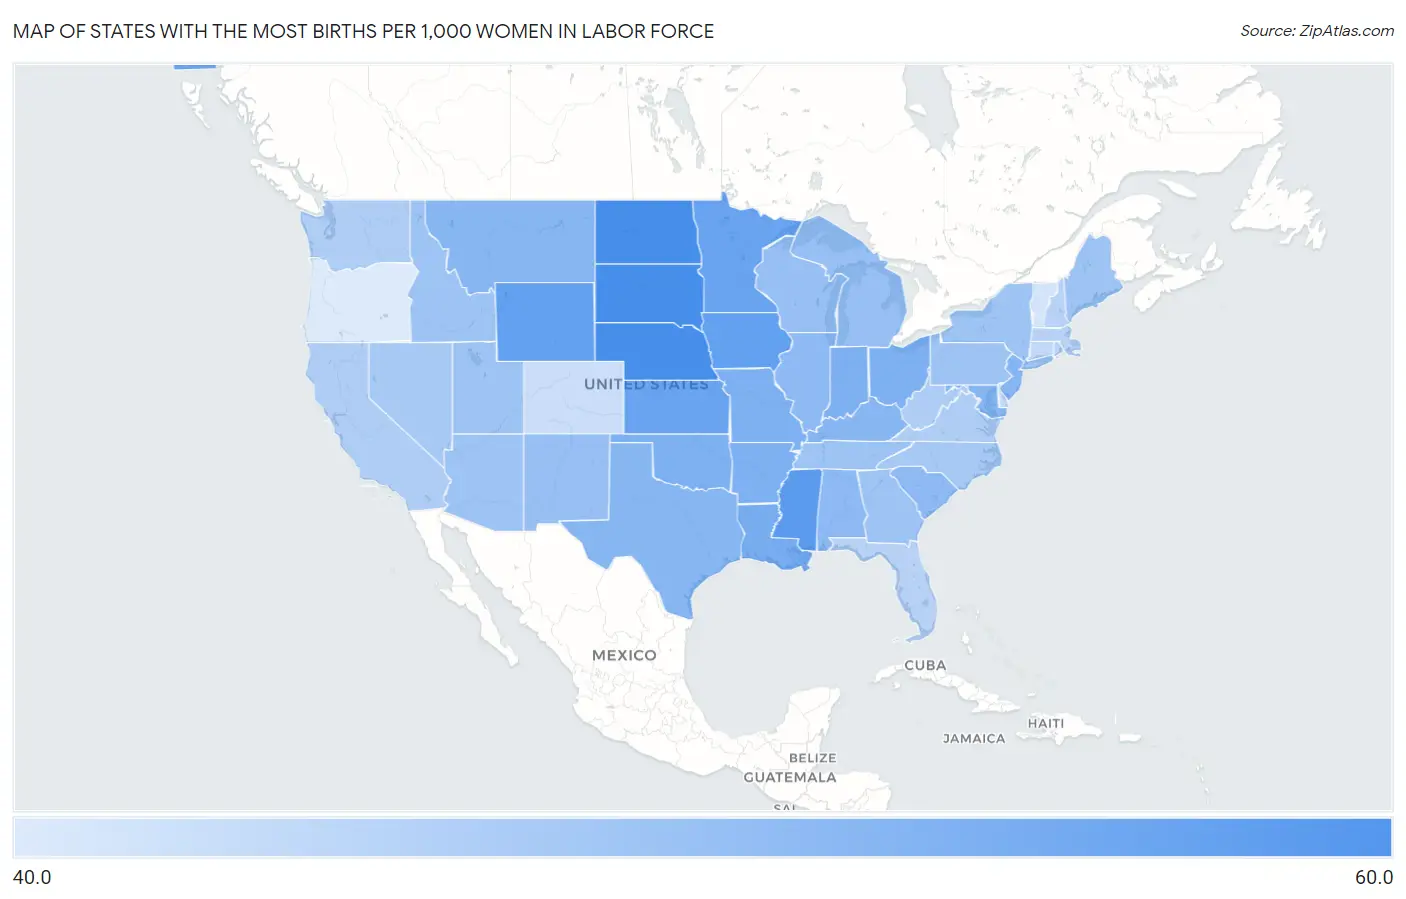 States with the Most Births per 1,000 Women in Labor Force in the United States Map